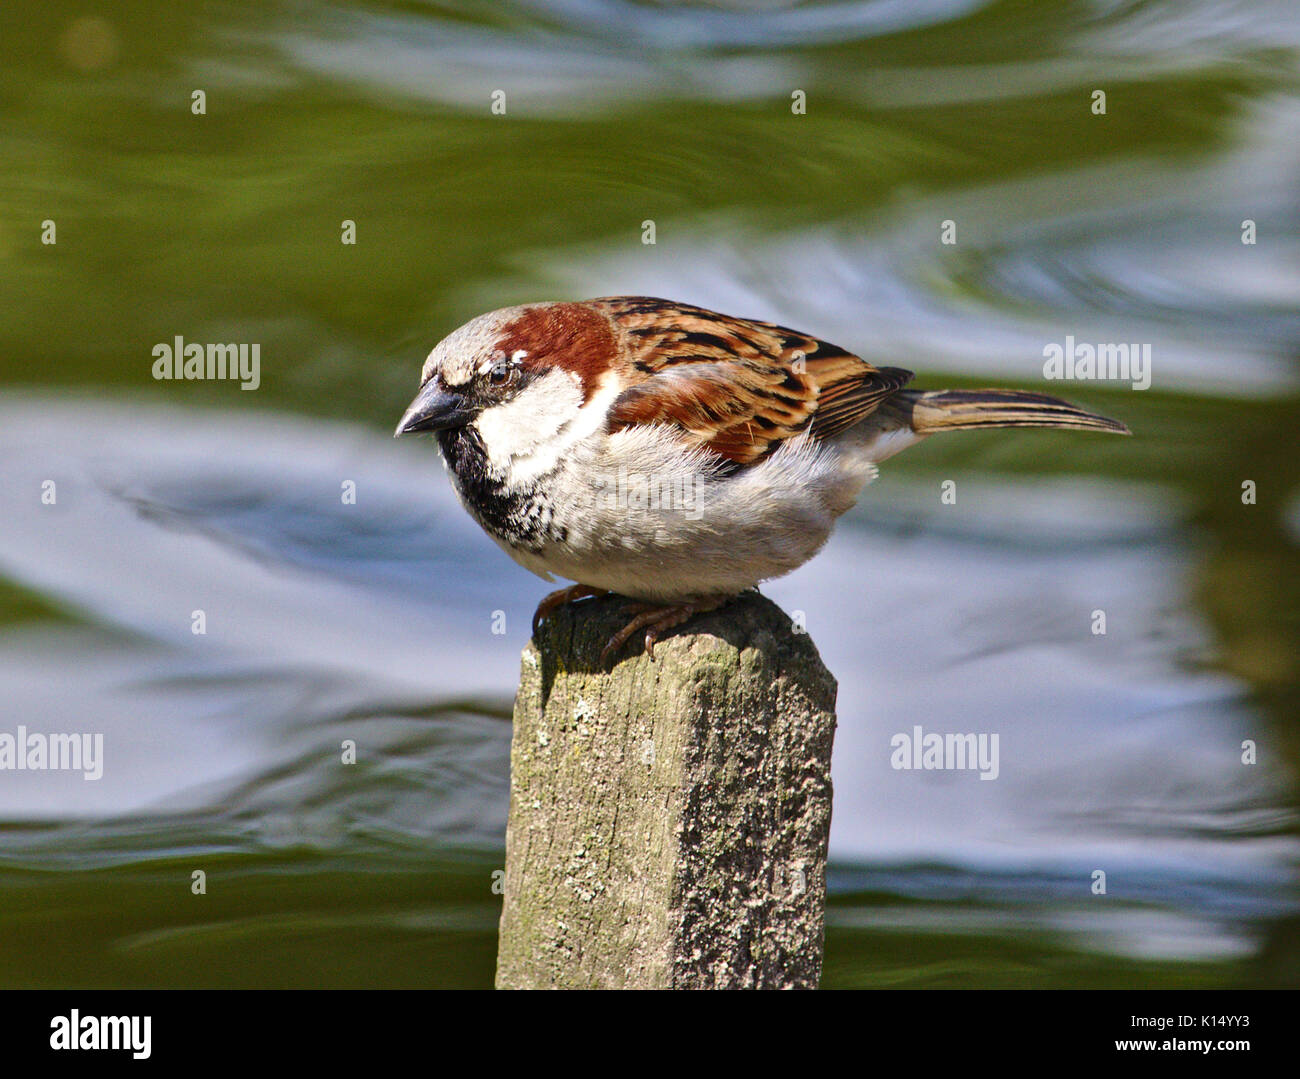 House sparrow perched on a fence post with a running stream in the background Stock Photo